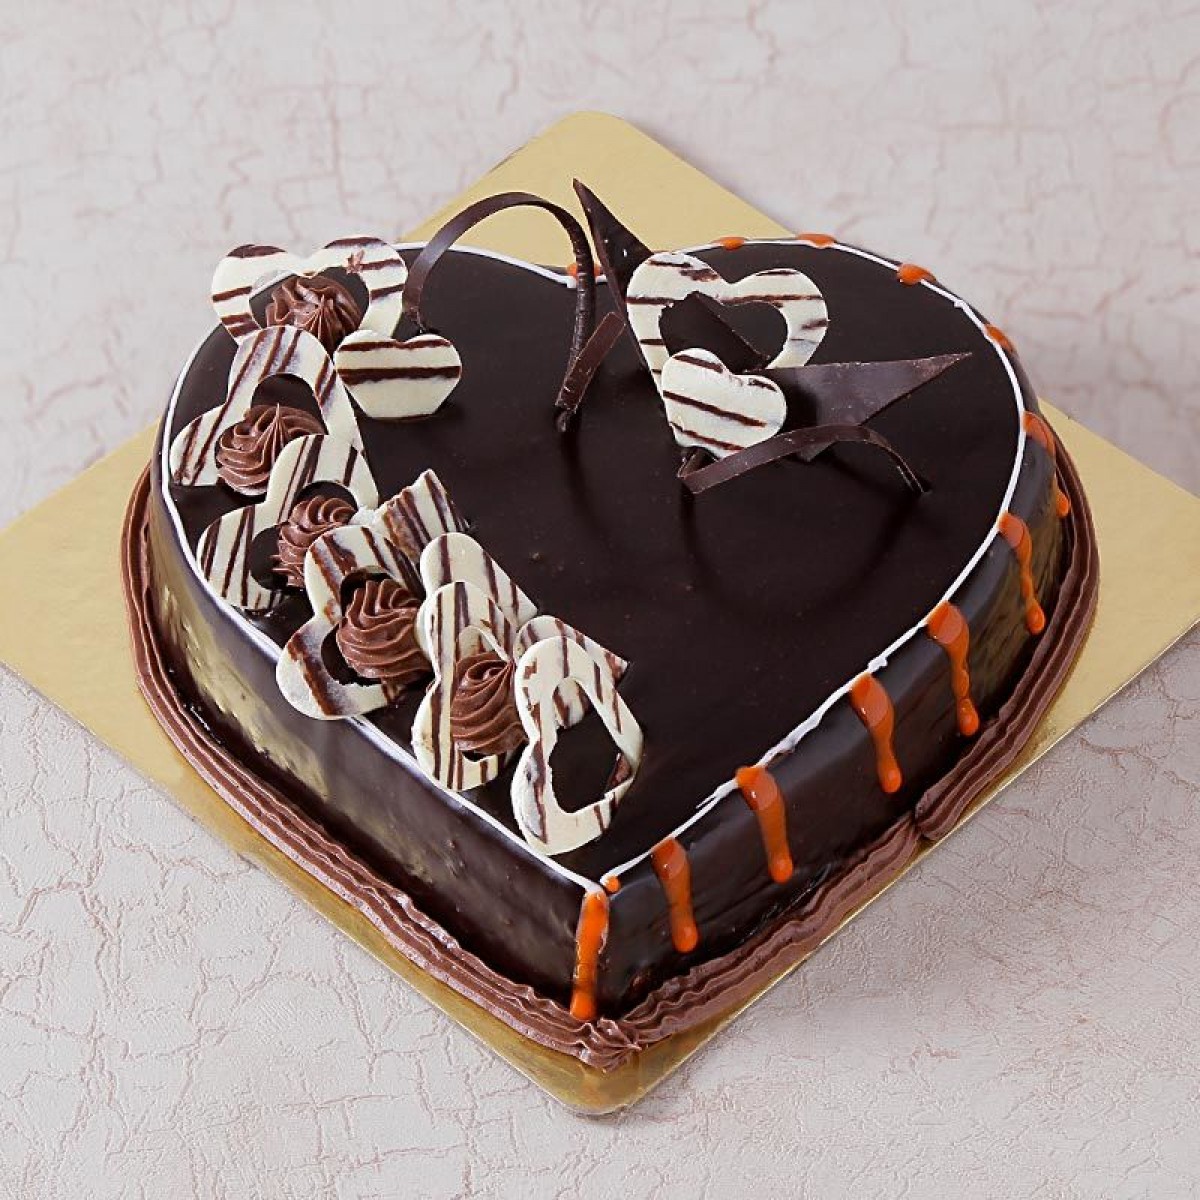 Buy Love you heart shape truffle cake Online at Best Price | Od